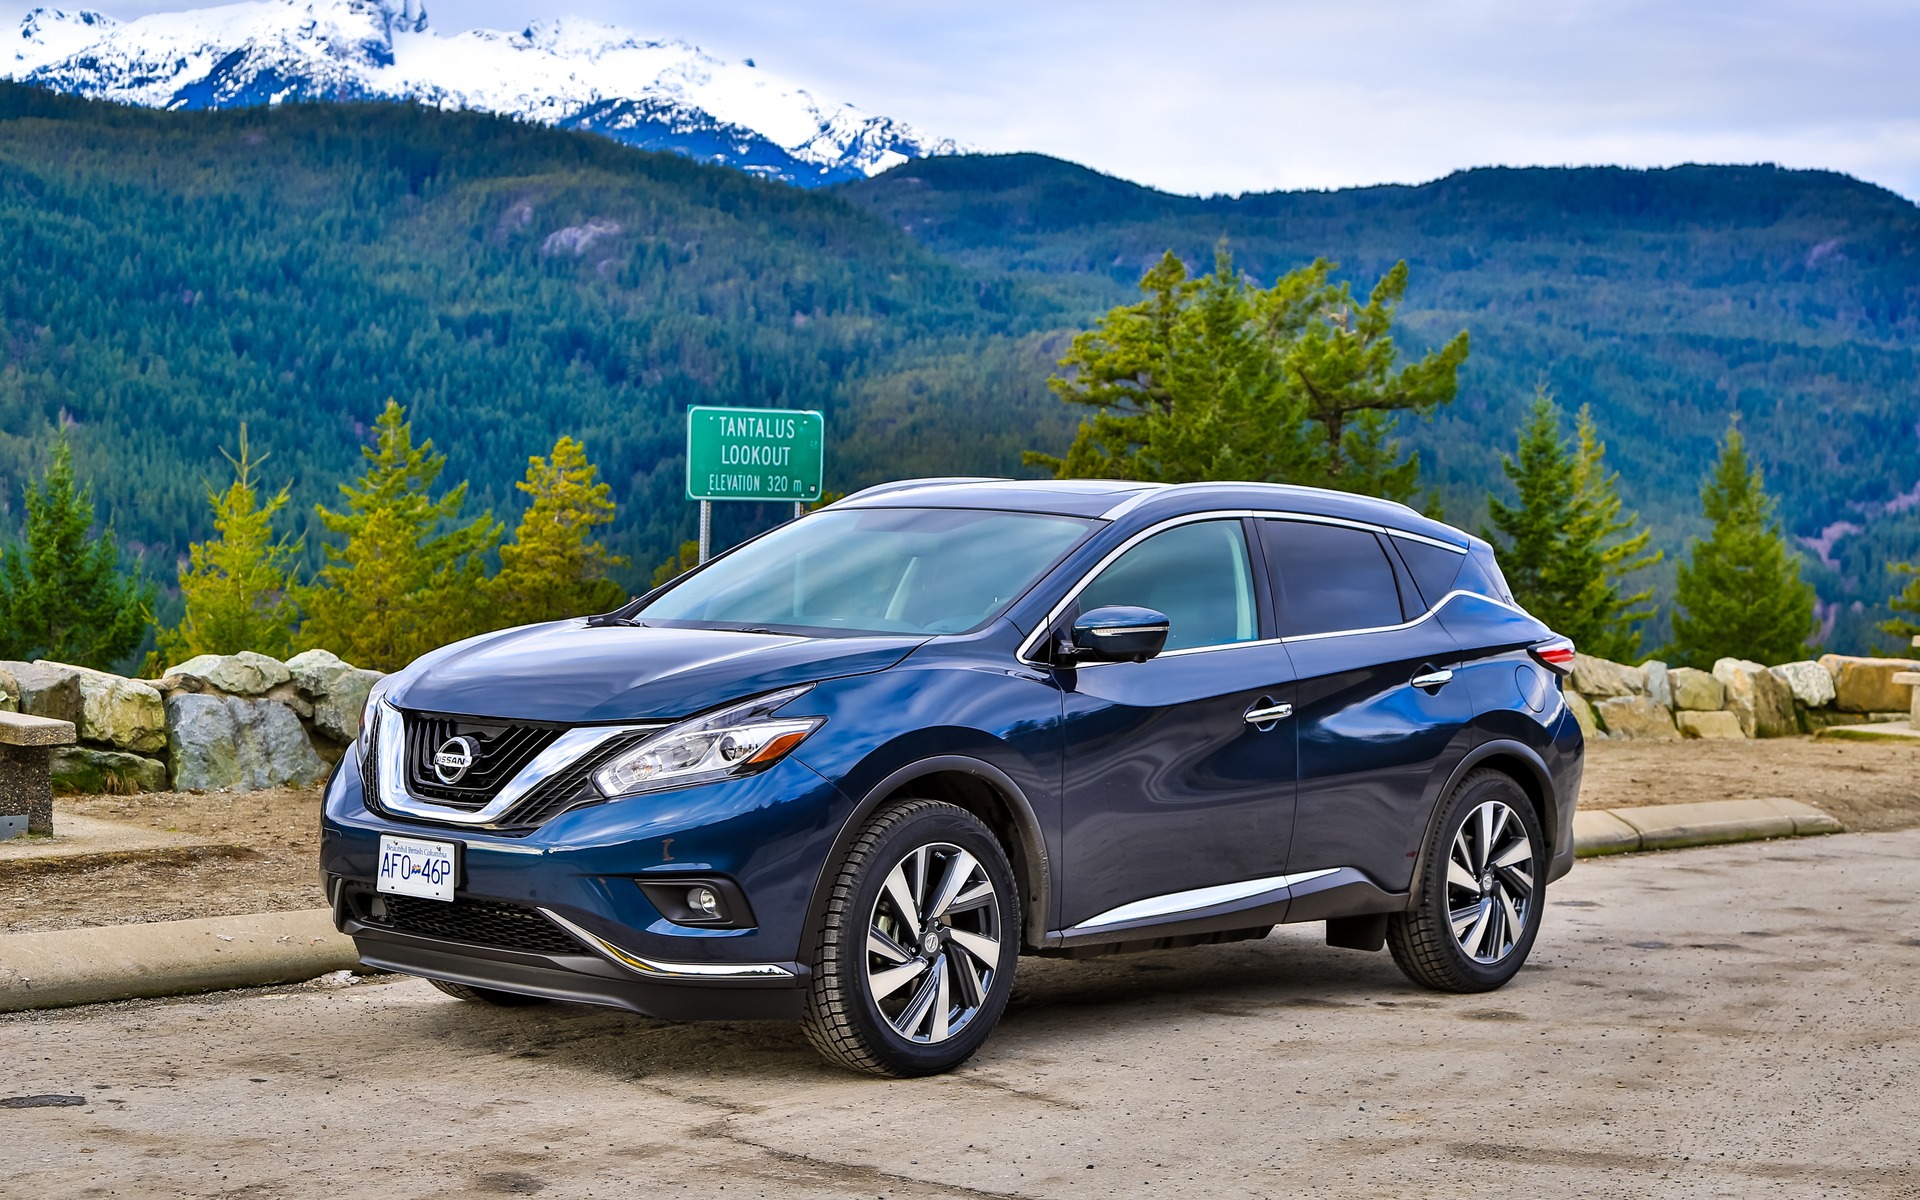 Compared to the last generation, the new Murano is slightly bigger.